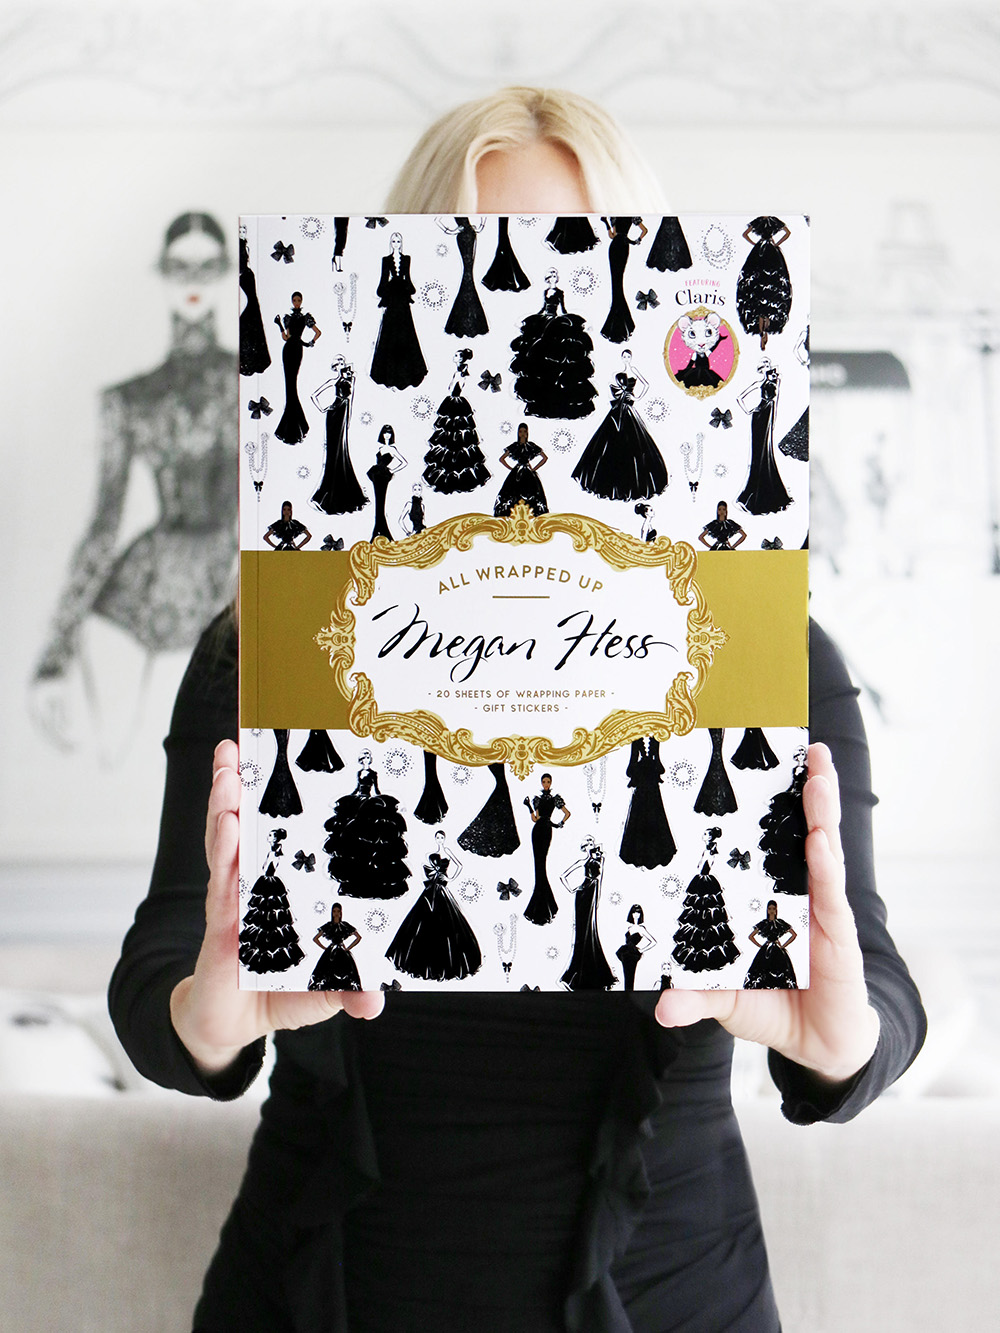 All Wrapped Up by Megan Hess: A Wrapping Paper Book - Featuring